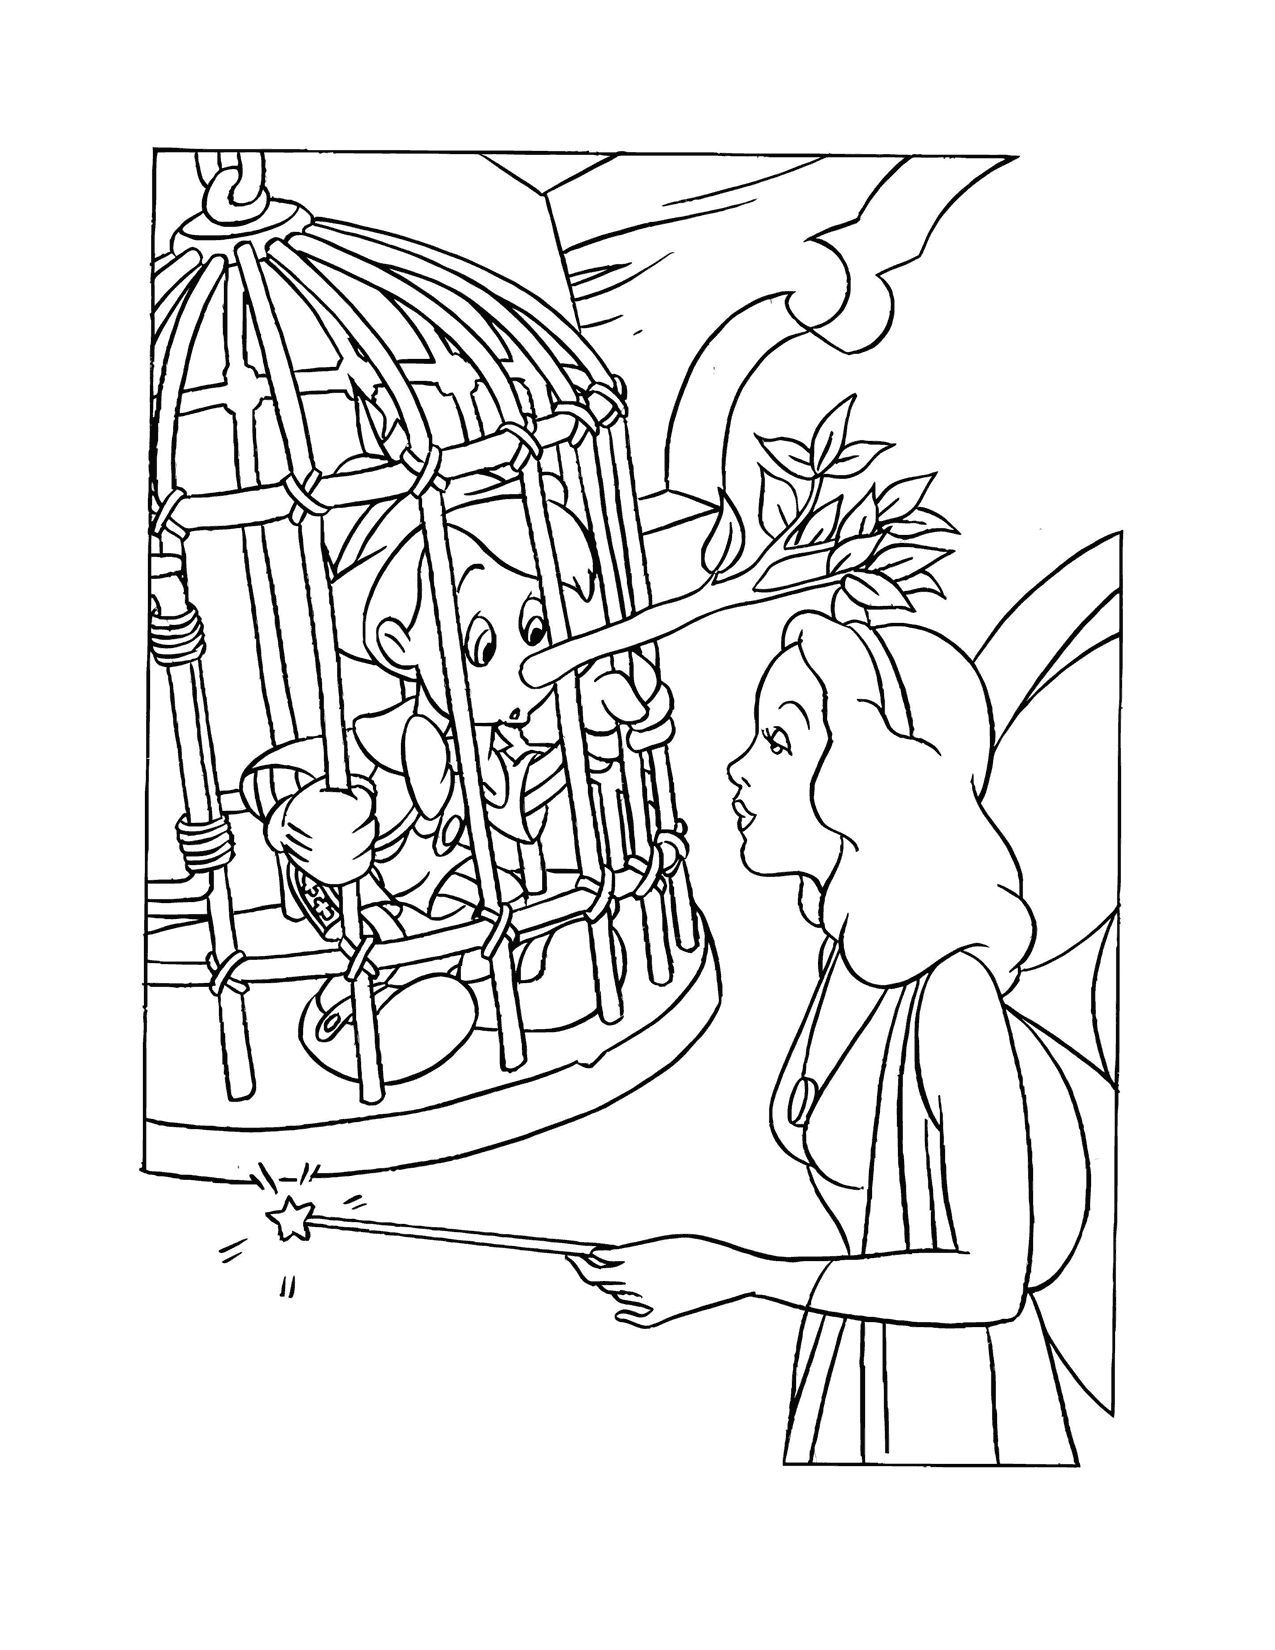 The Fairy Helps Pinocchio Coloring Page